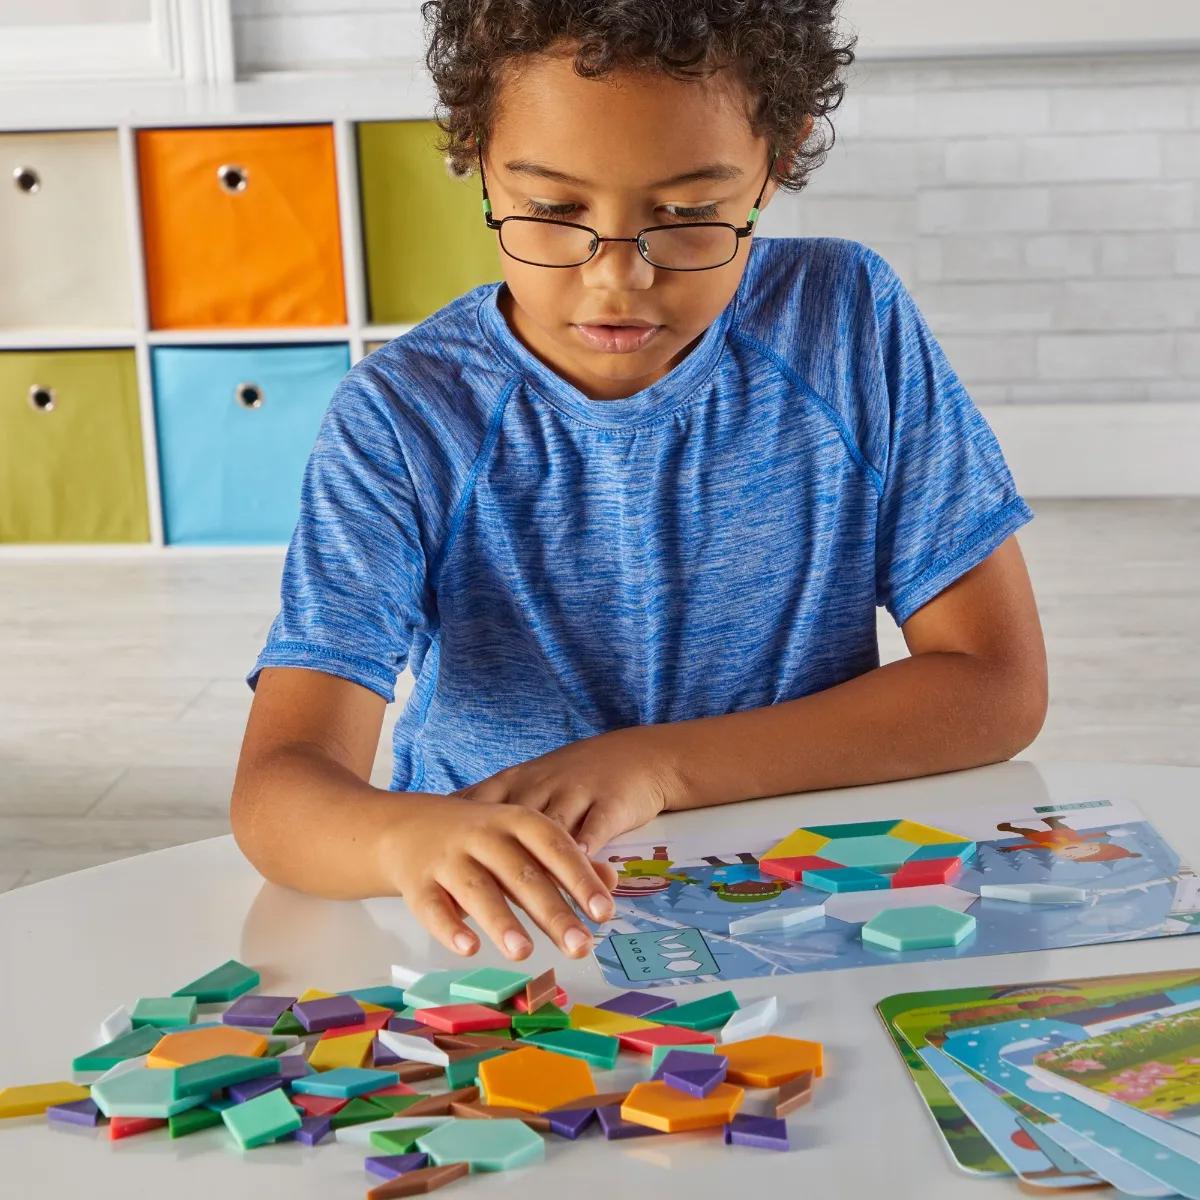 Seasons & Weather Pattern Block Puzzle Set-Jigsaw Puzzles-Learning Resources-Yes Bebe